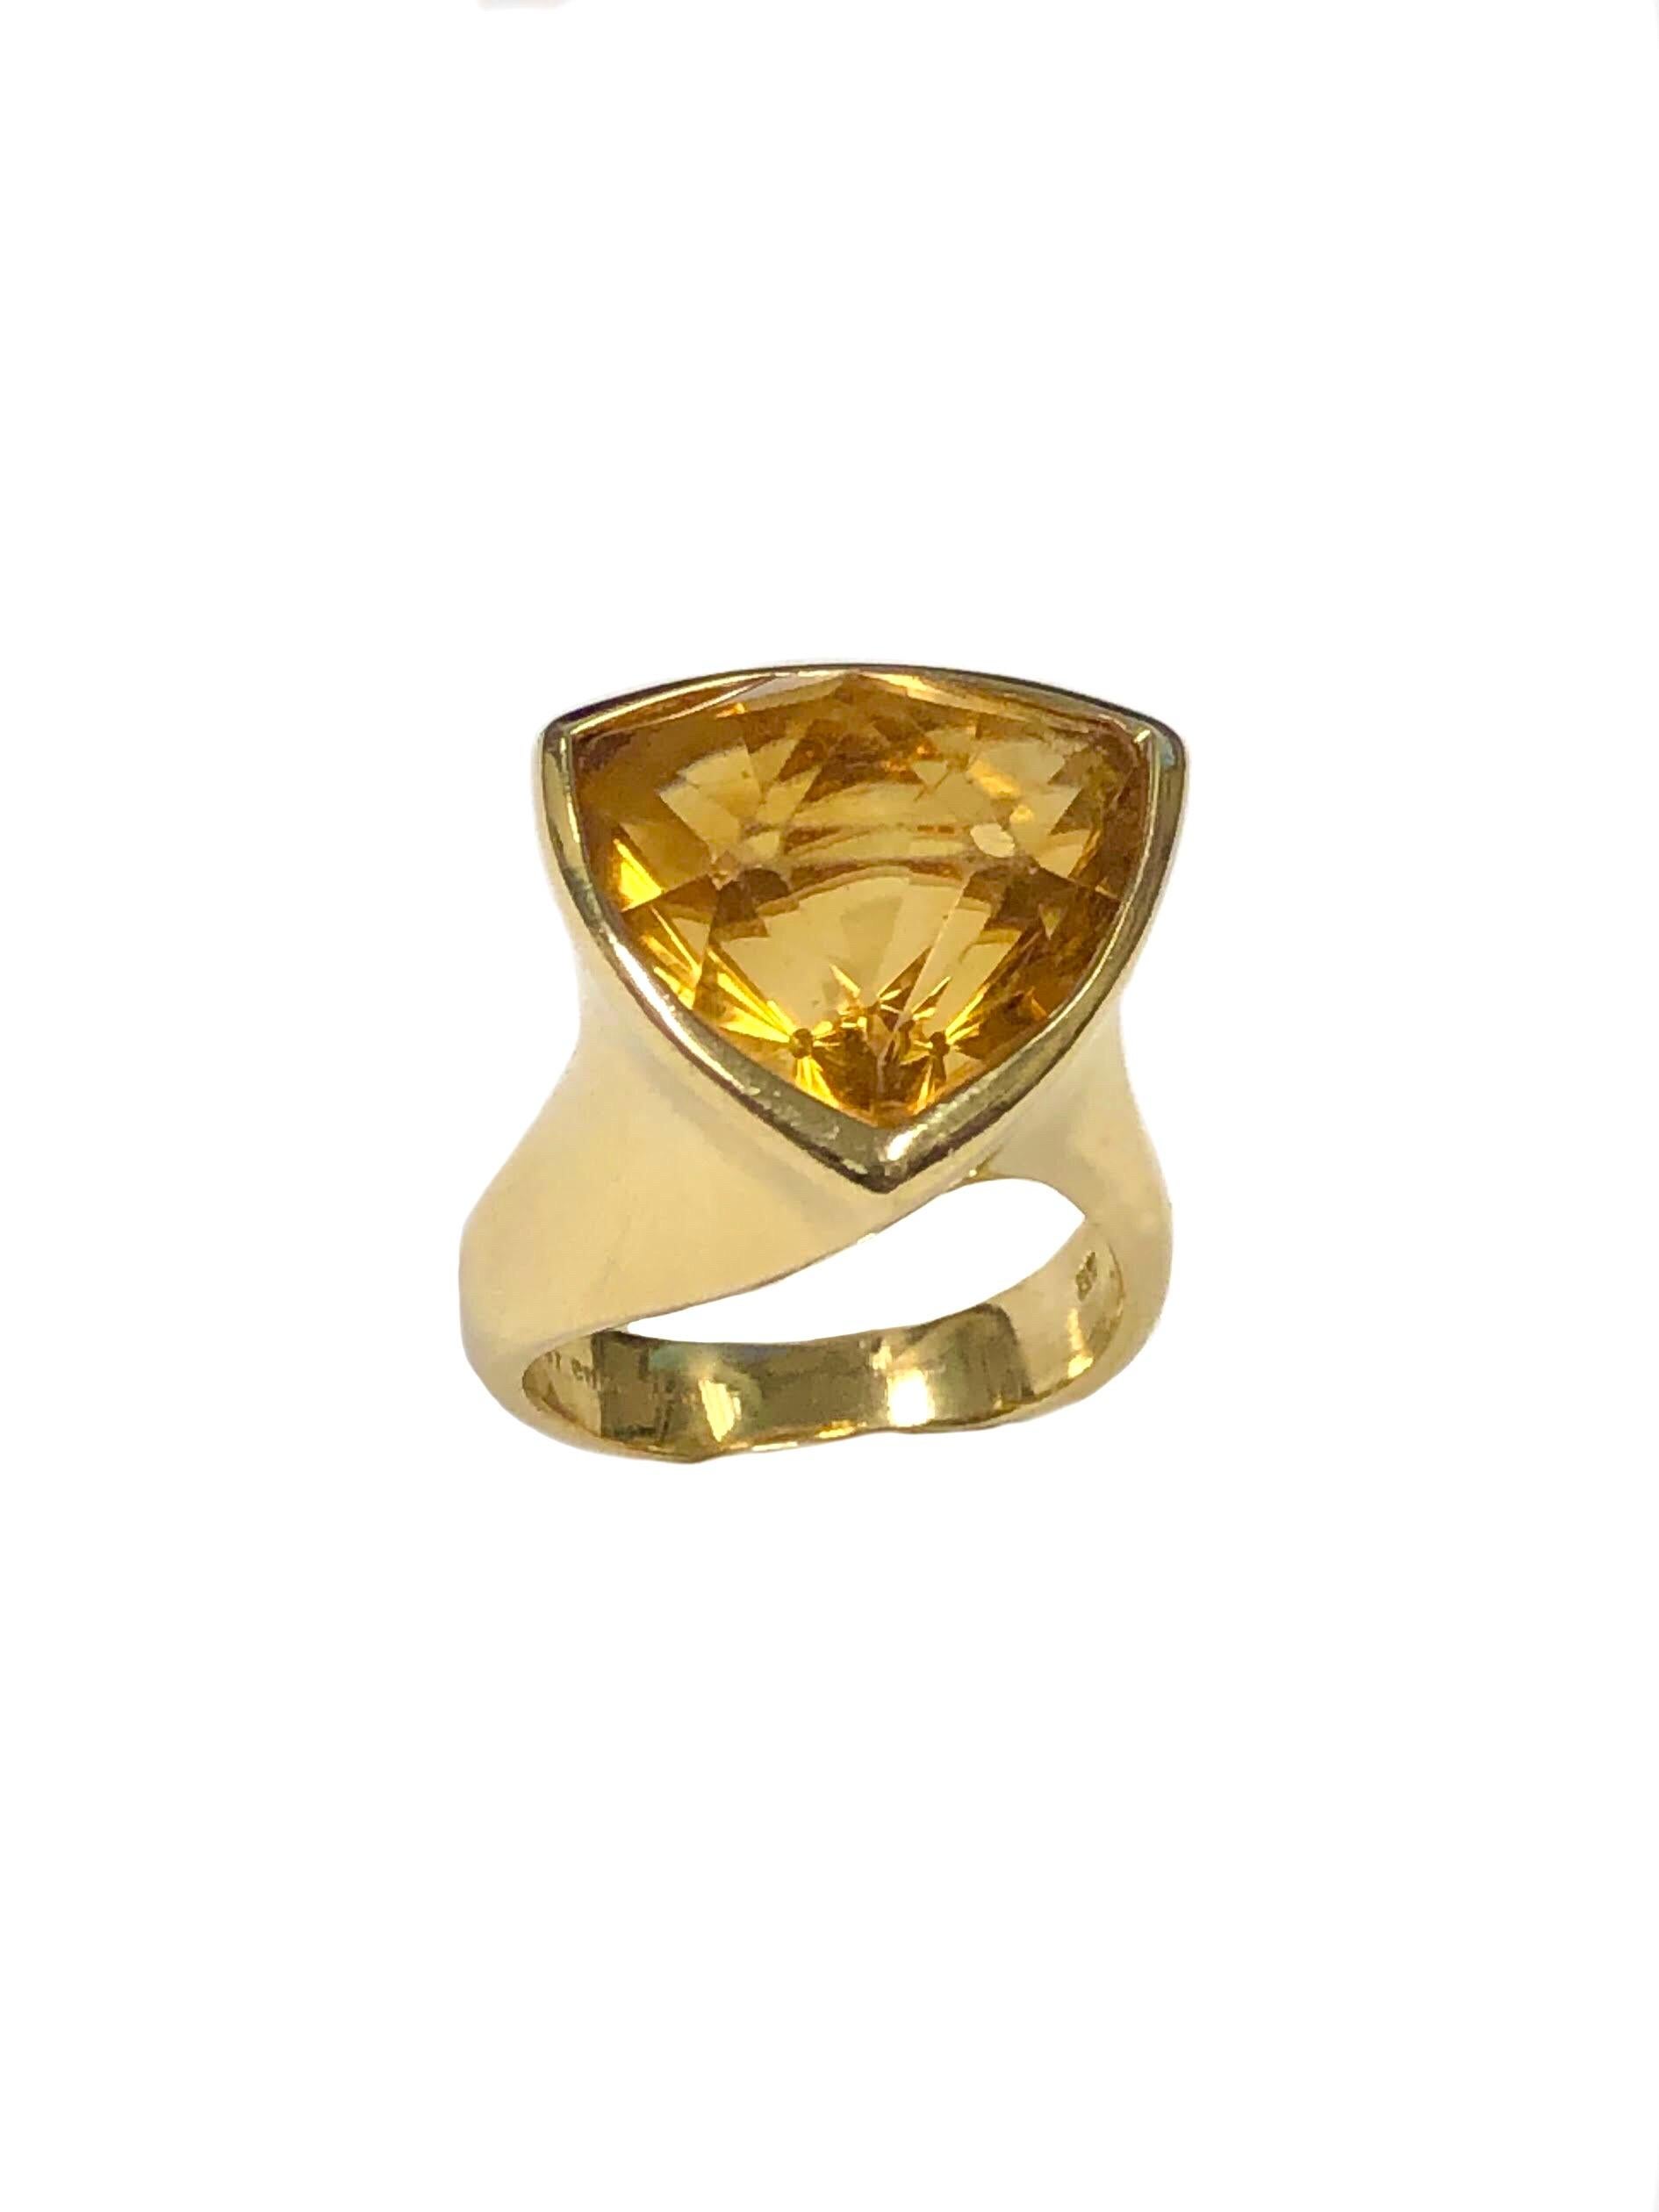 Circa 1980 Angela Cummings 18K Yellow Gold Ring, set with a very unusual shape, faceted Golden Yellow Orange Citrine of approximately 10 Carats, the top of the ring measures 3/4 X 3/4 Inch. Finger size 7 3/4. This Ring is most likely a one off, non